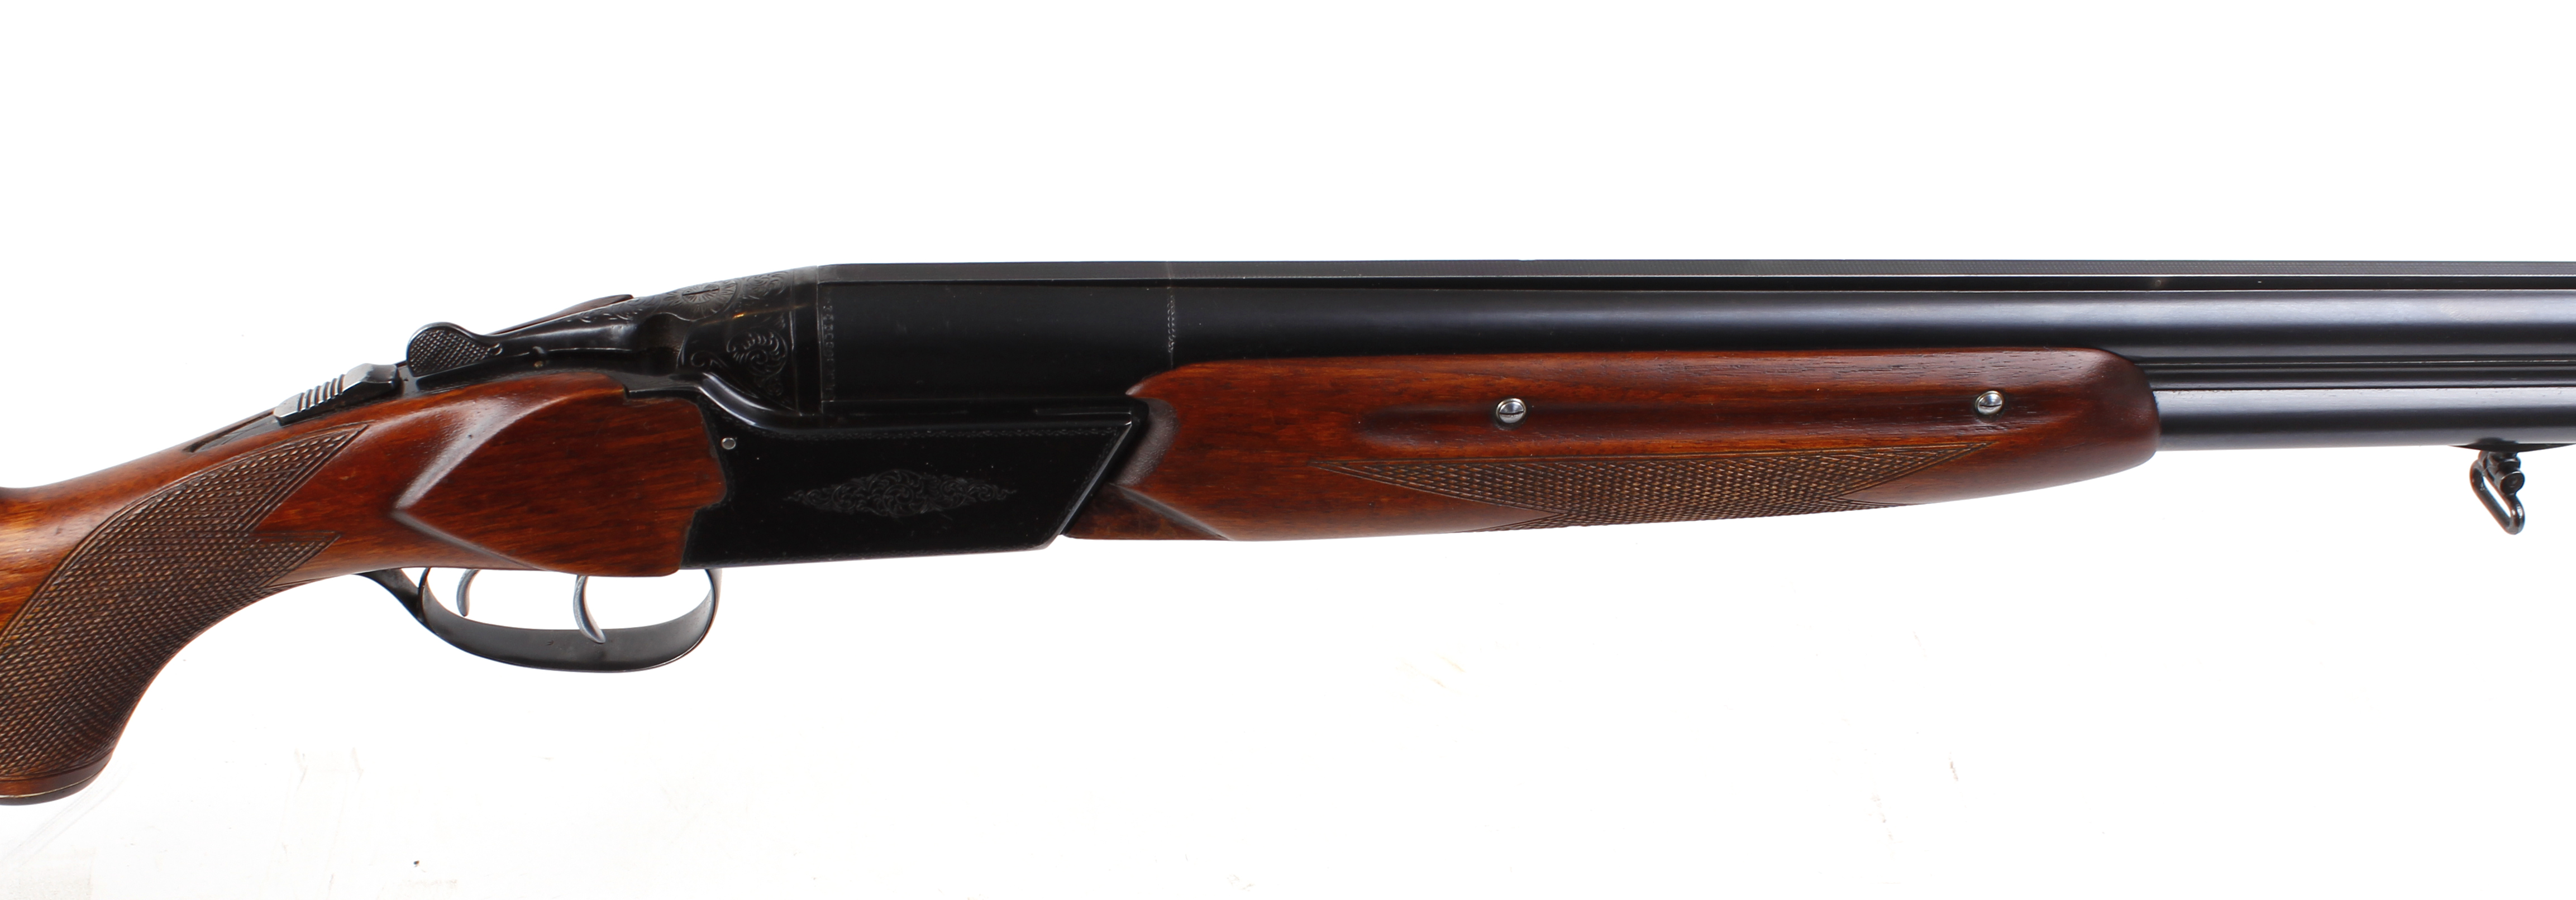 12 bore Baikal, over and under, 28,1/2 ins barrels, full & 1/2, 2,2/4 ins chambers, engraved